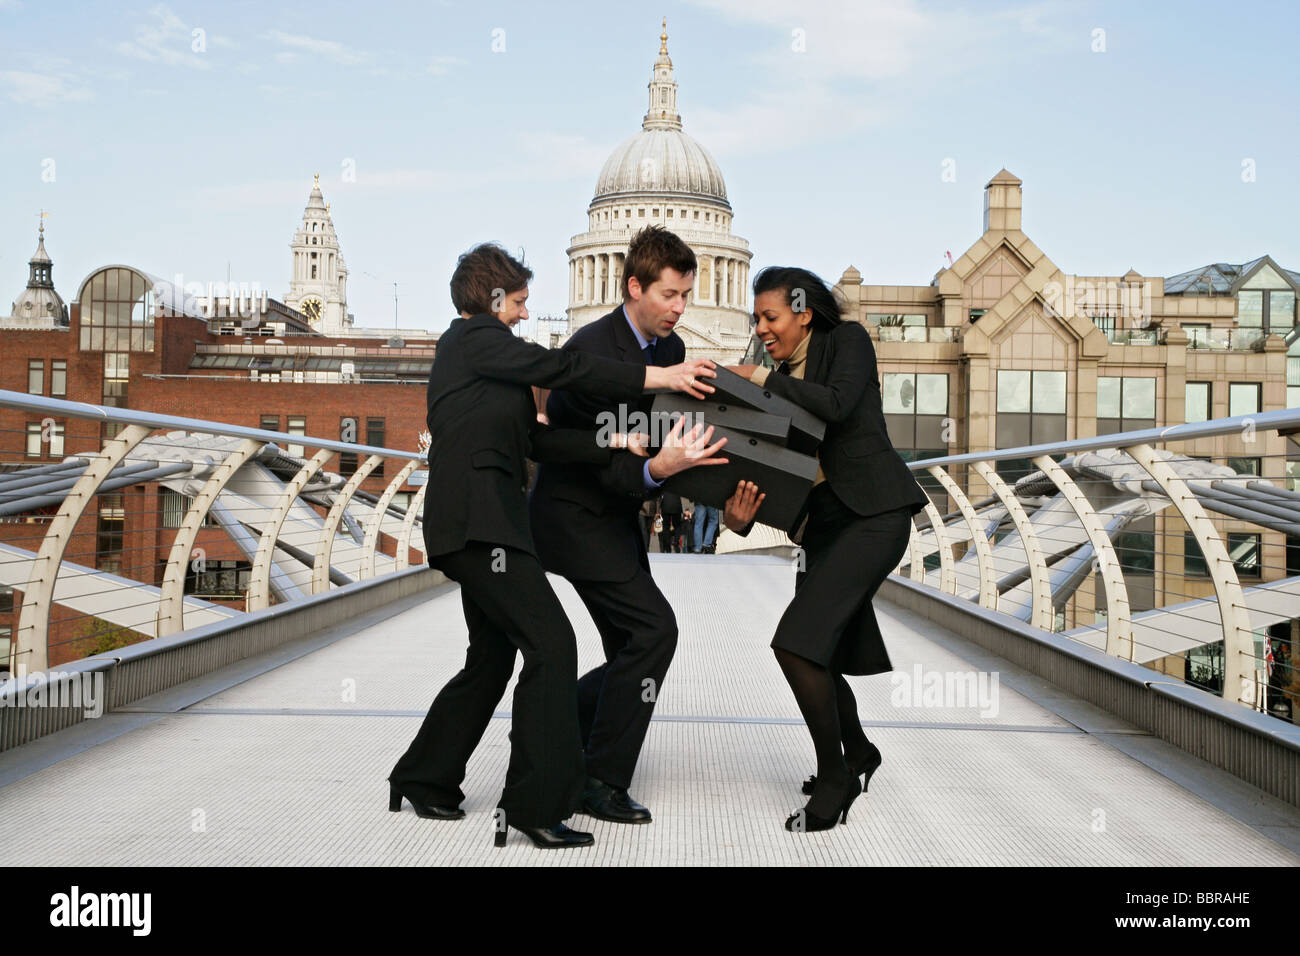 Three business people (two female, one male) on the millennium struggling to hold a pile of file boxes, Stock Photo